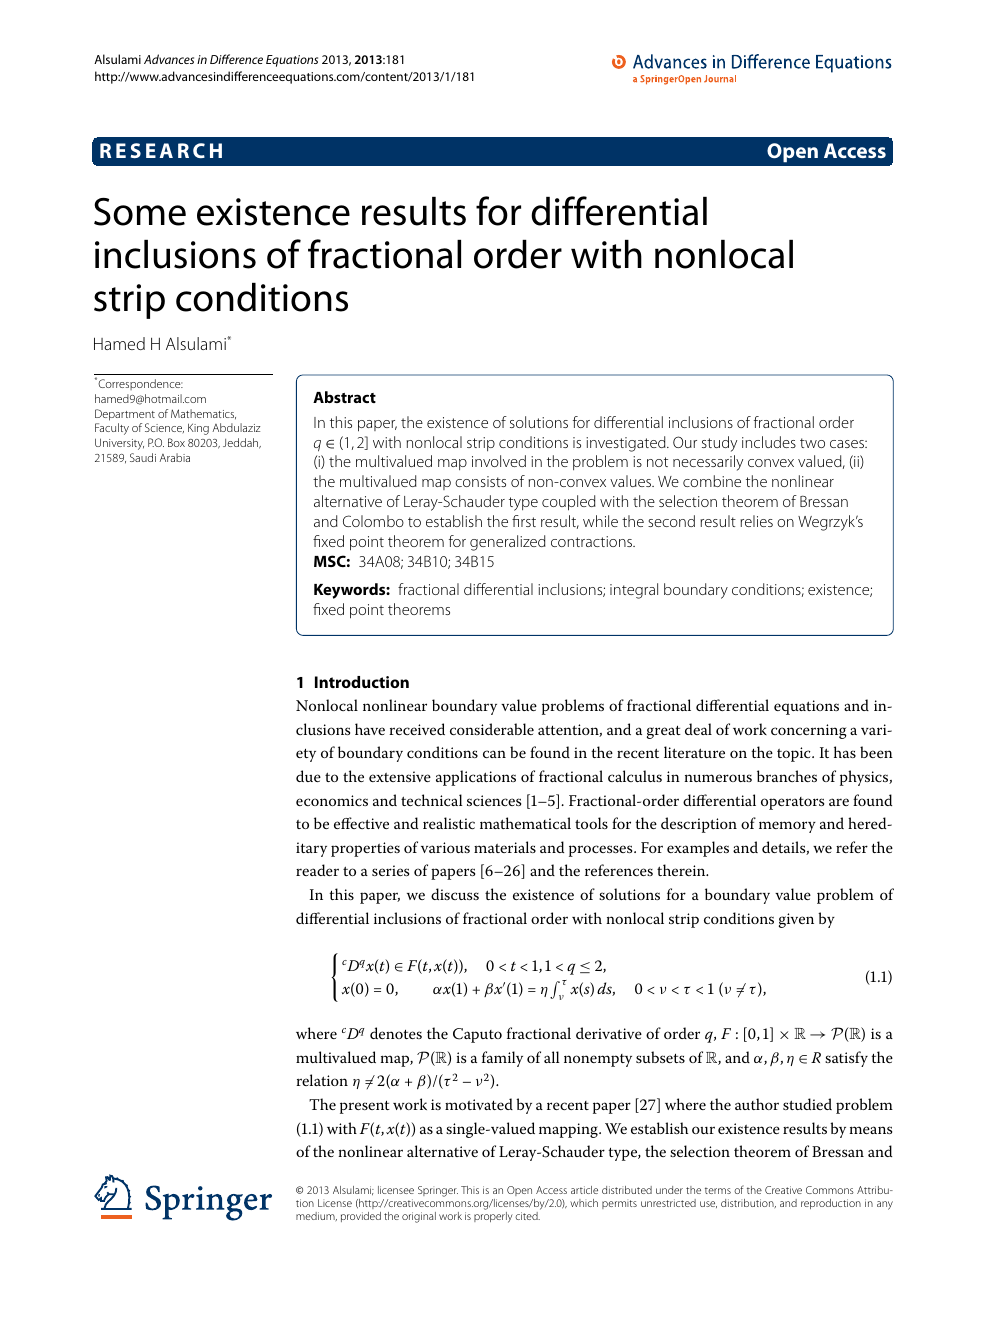 Some Existence Results For Differential Inclusions Of Fractional Order With Nonlocal Strip Conditions Topic Of Research Paper In Mathematics Download Scholarly Article Pdf And Read For Free On Cyberleninka Open Science